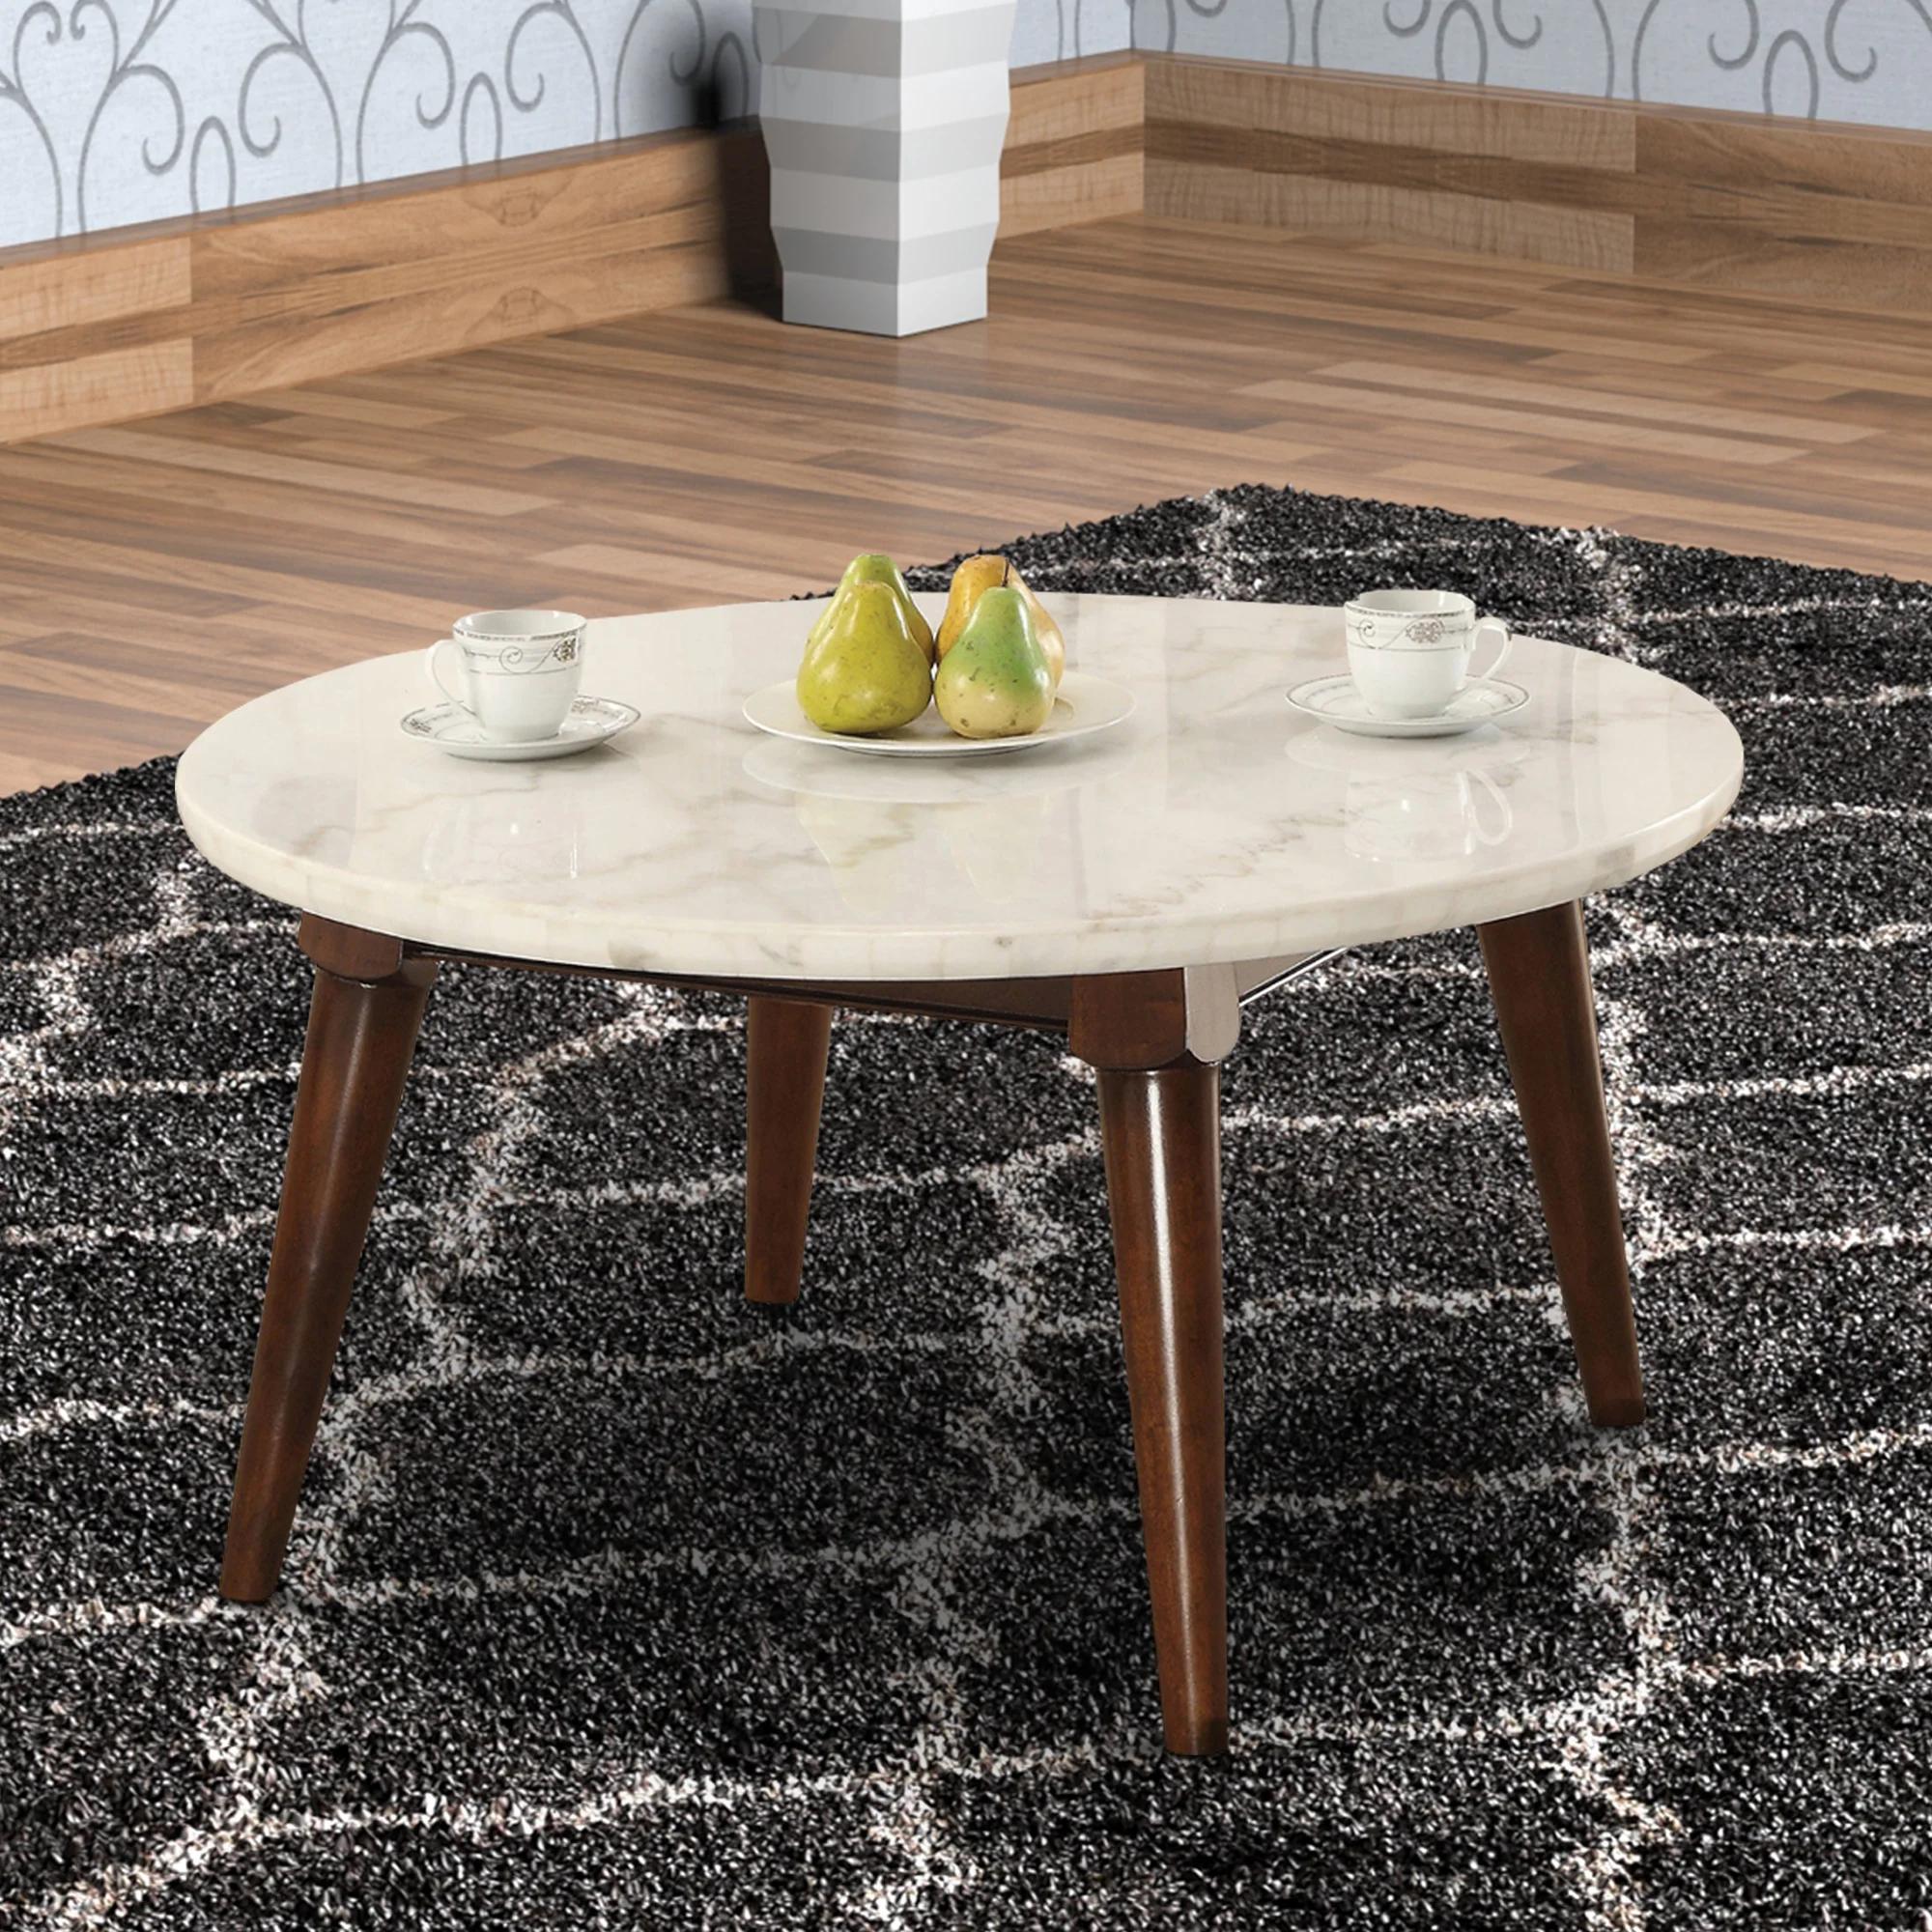 

    
Contemporary White Marble & Walnut Coffee Table by Acme Gasha 82890
